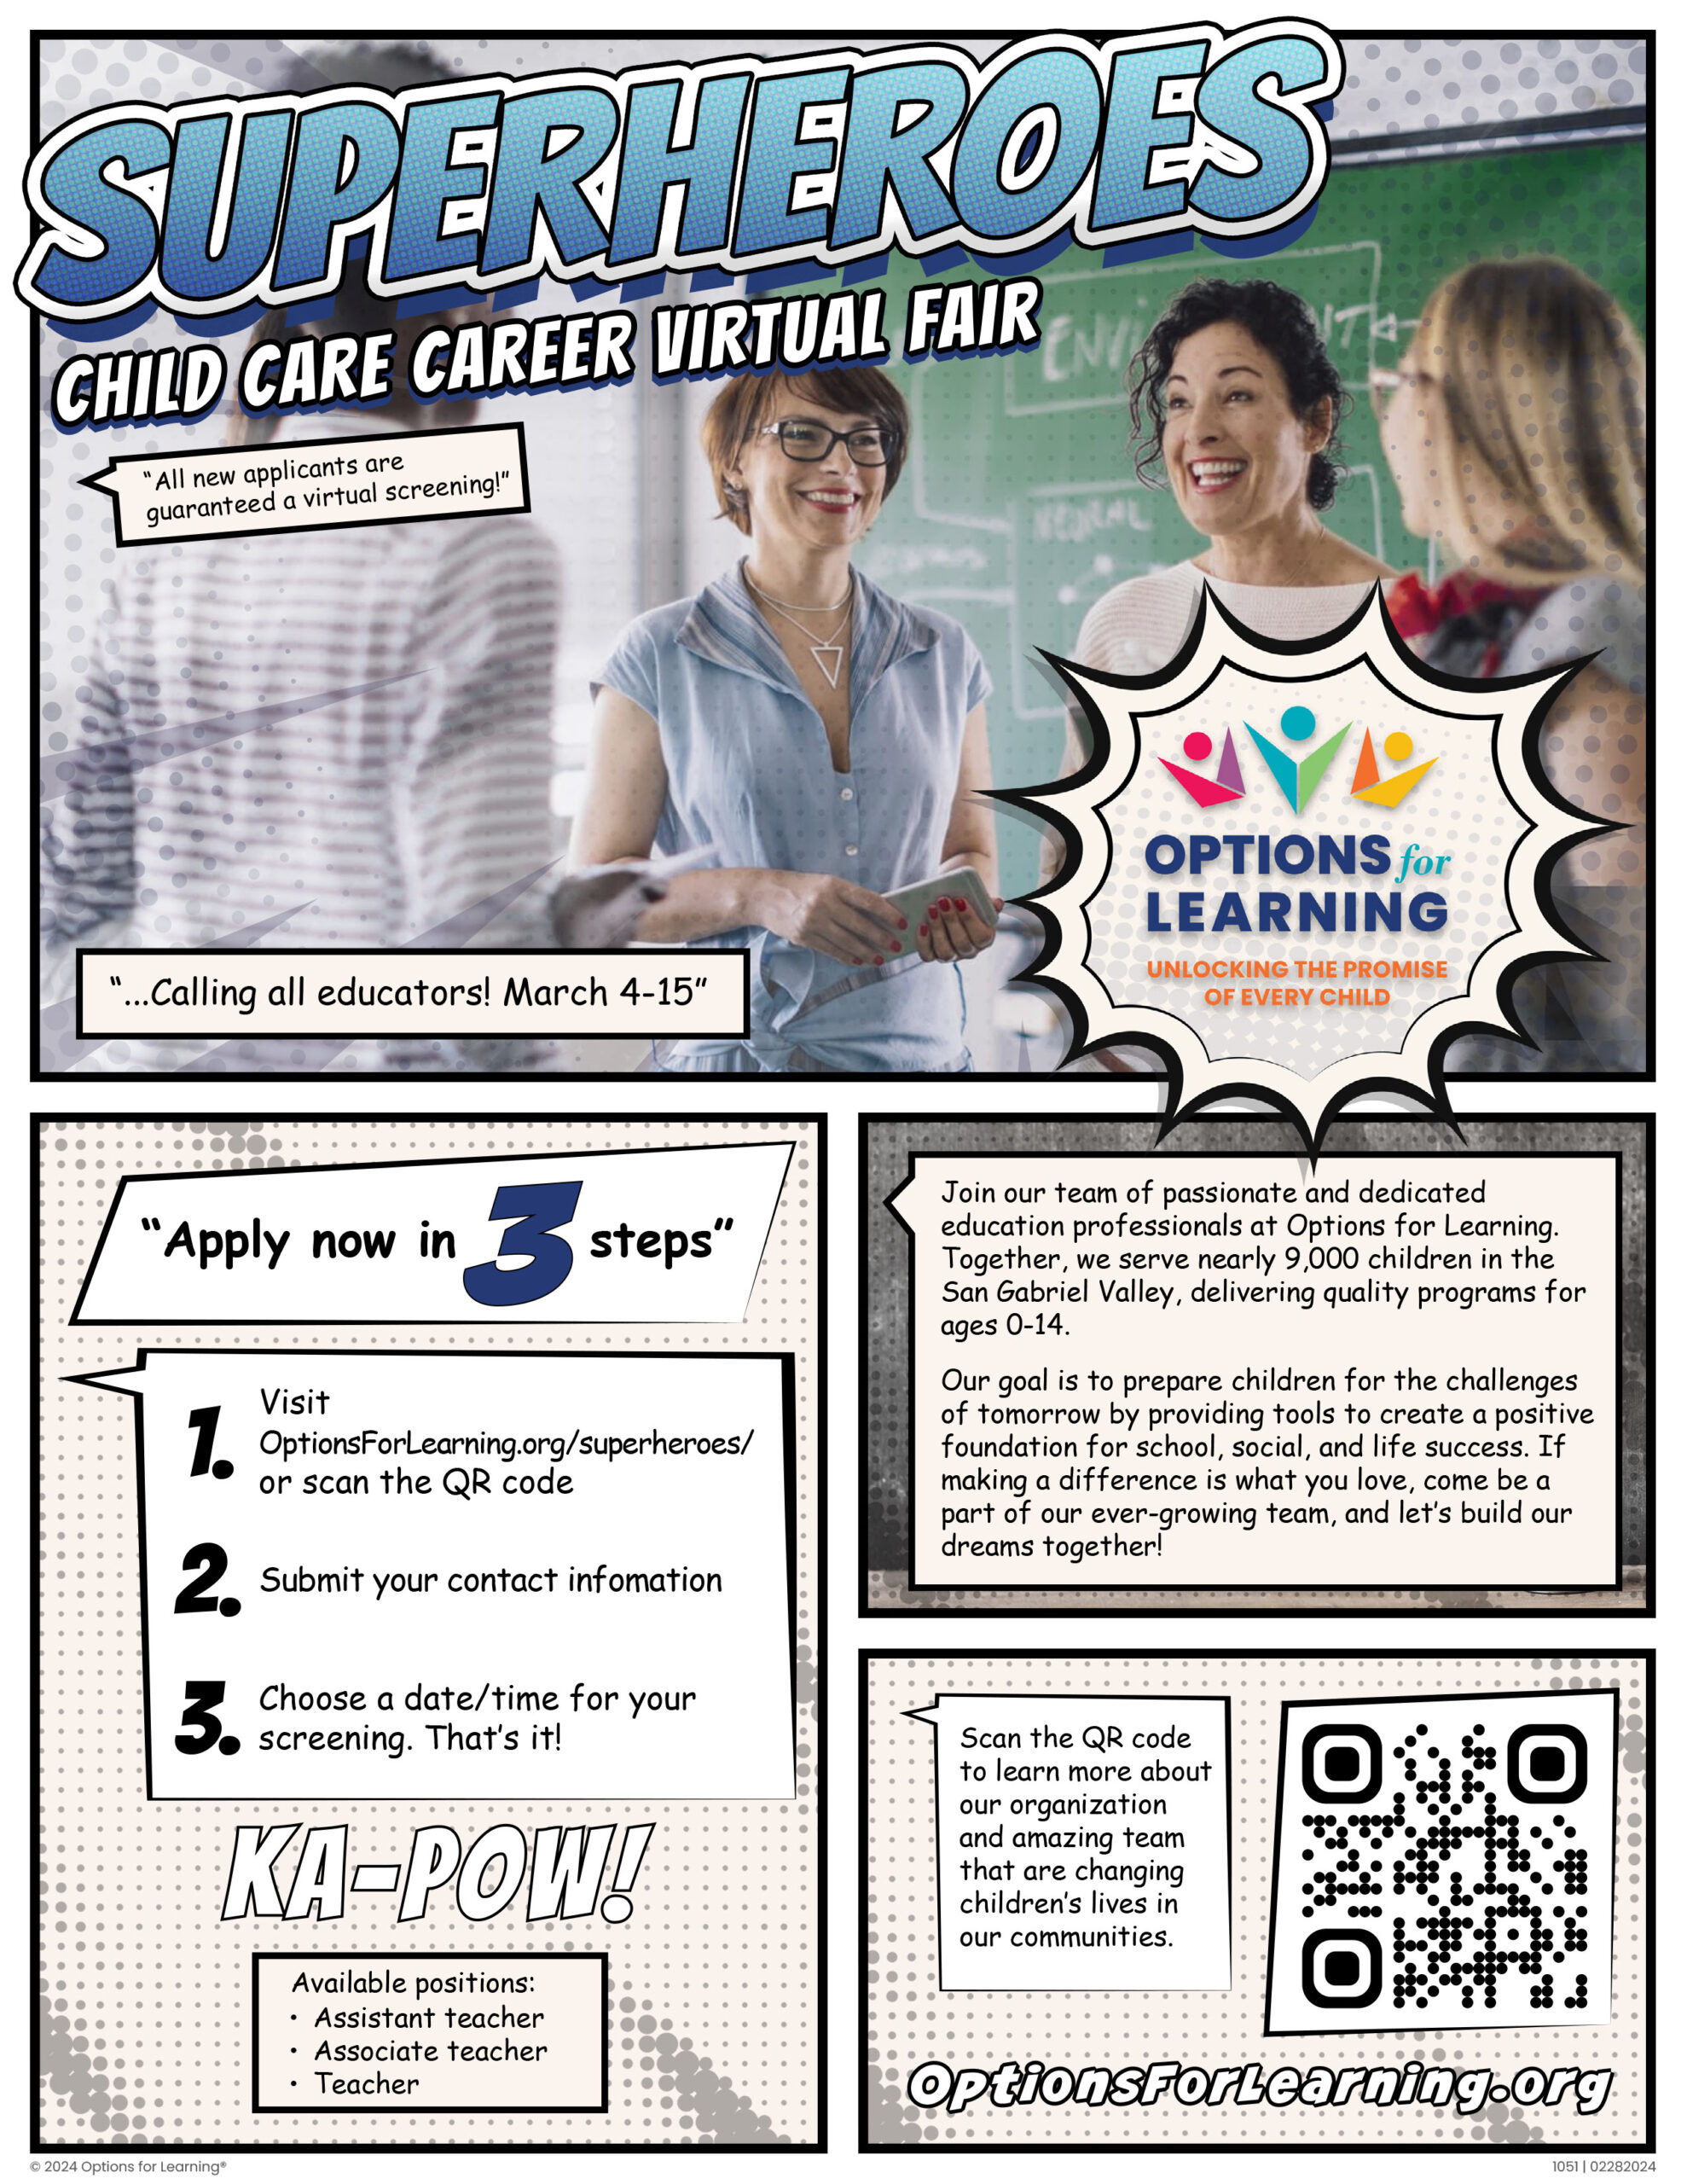 Superheroes Child Care virtual career fair with Options for Learning 